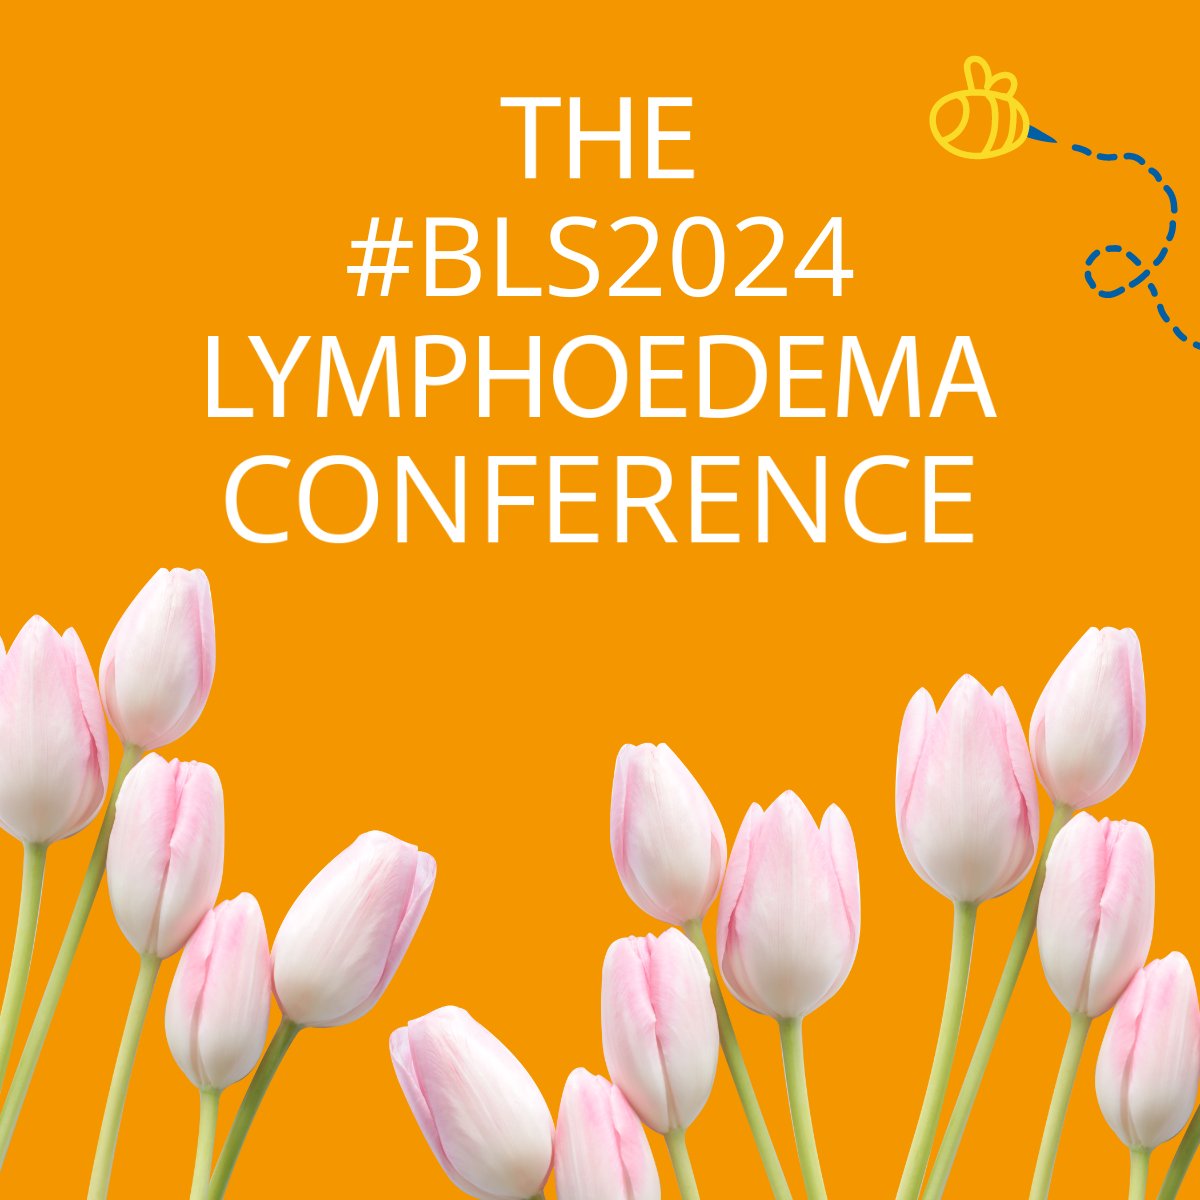 Spring into action and book your space at the #BLS2024 Lymphoedema Conference theblsconference.com/registration #MedicalEducation